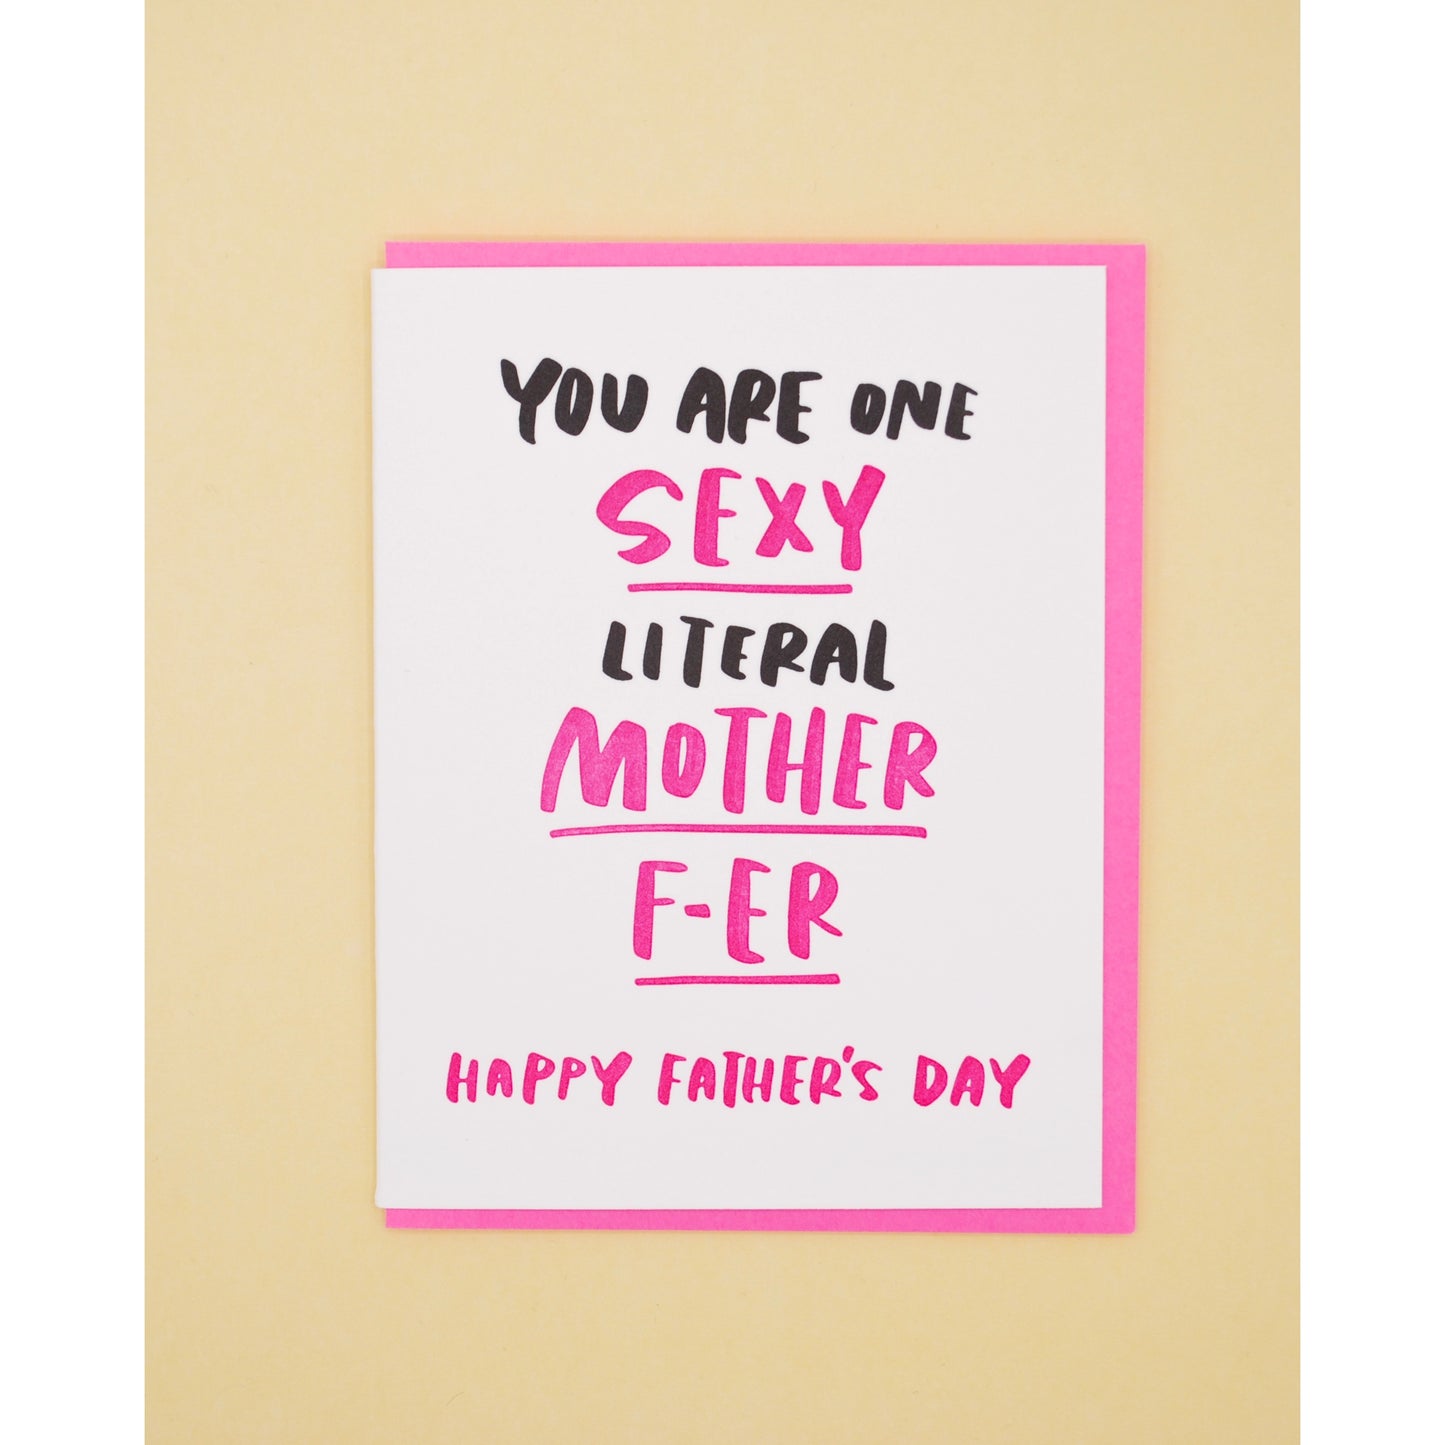 Mother F-er Father's Day Card